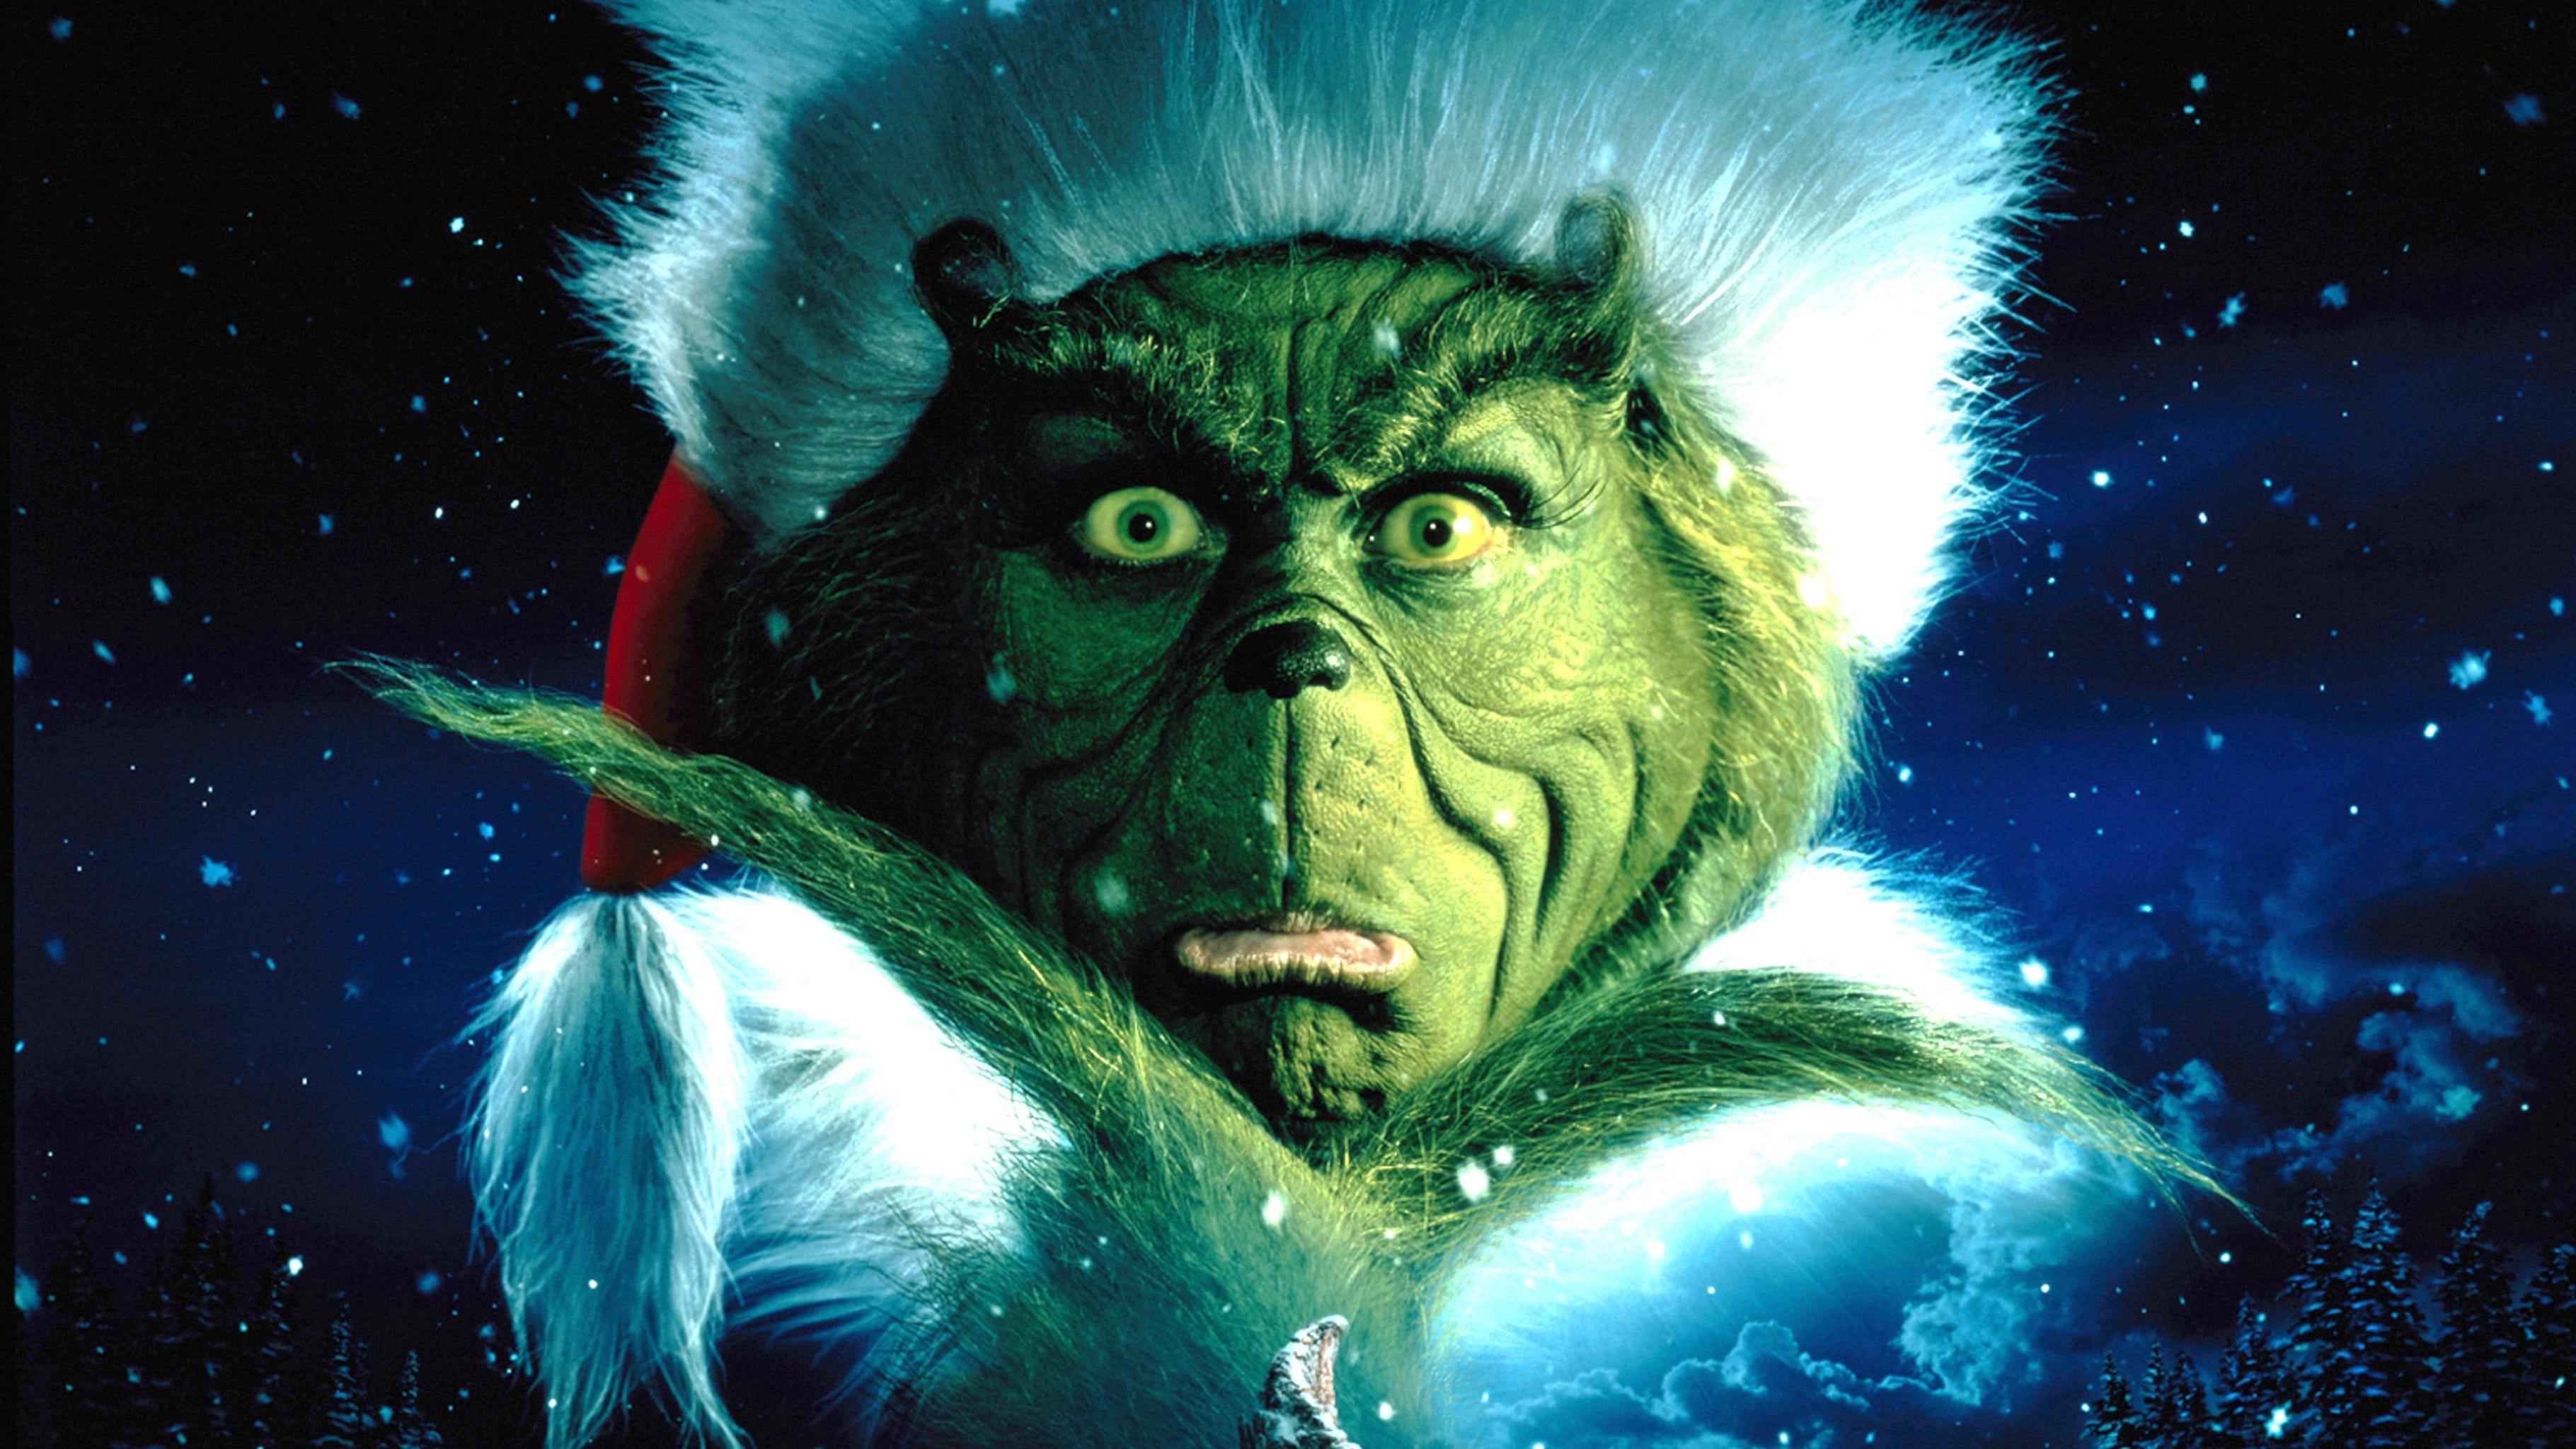 What Can I Watch The Grinch On For Free - Watch How the Grinch Stole Christmas (2000) Full Movie Online Free